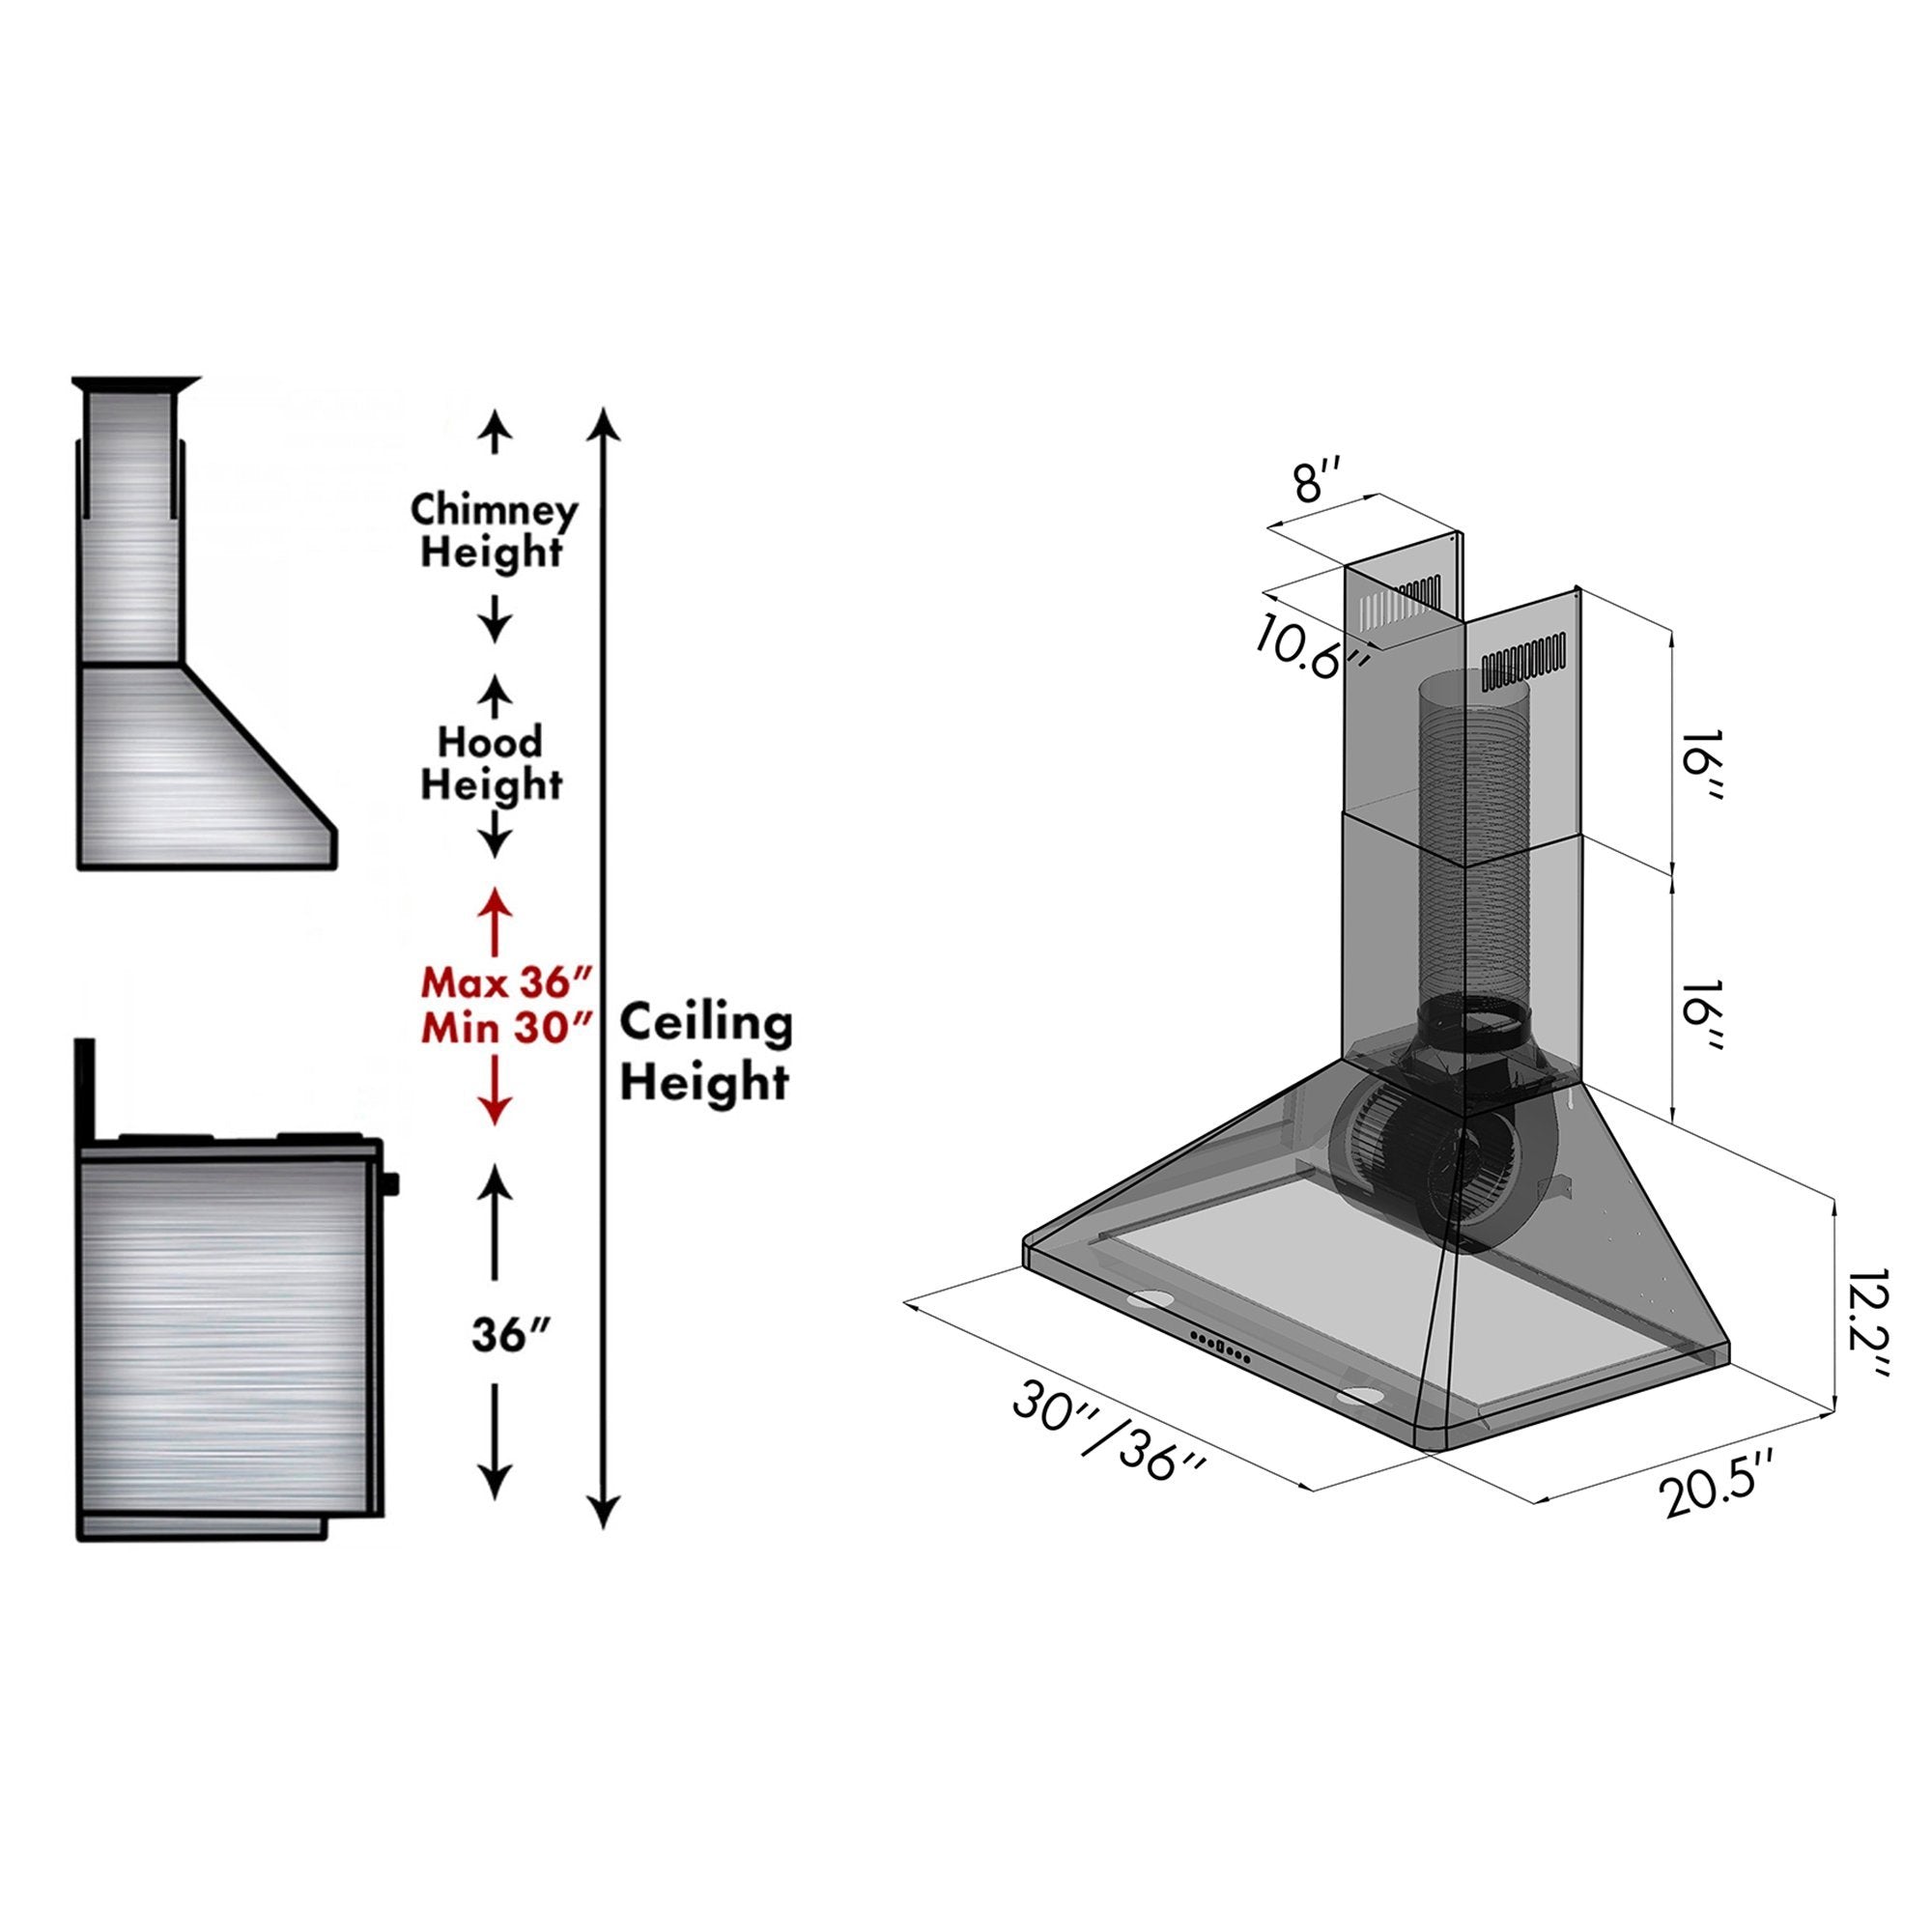 ZLINE Convertible Vent Wall Mount Range Hood in Stainless Steel (KF1) chimney height guide and dimensional measurements. 